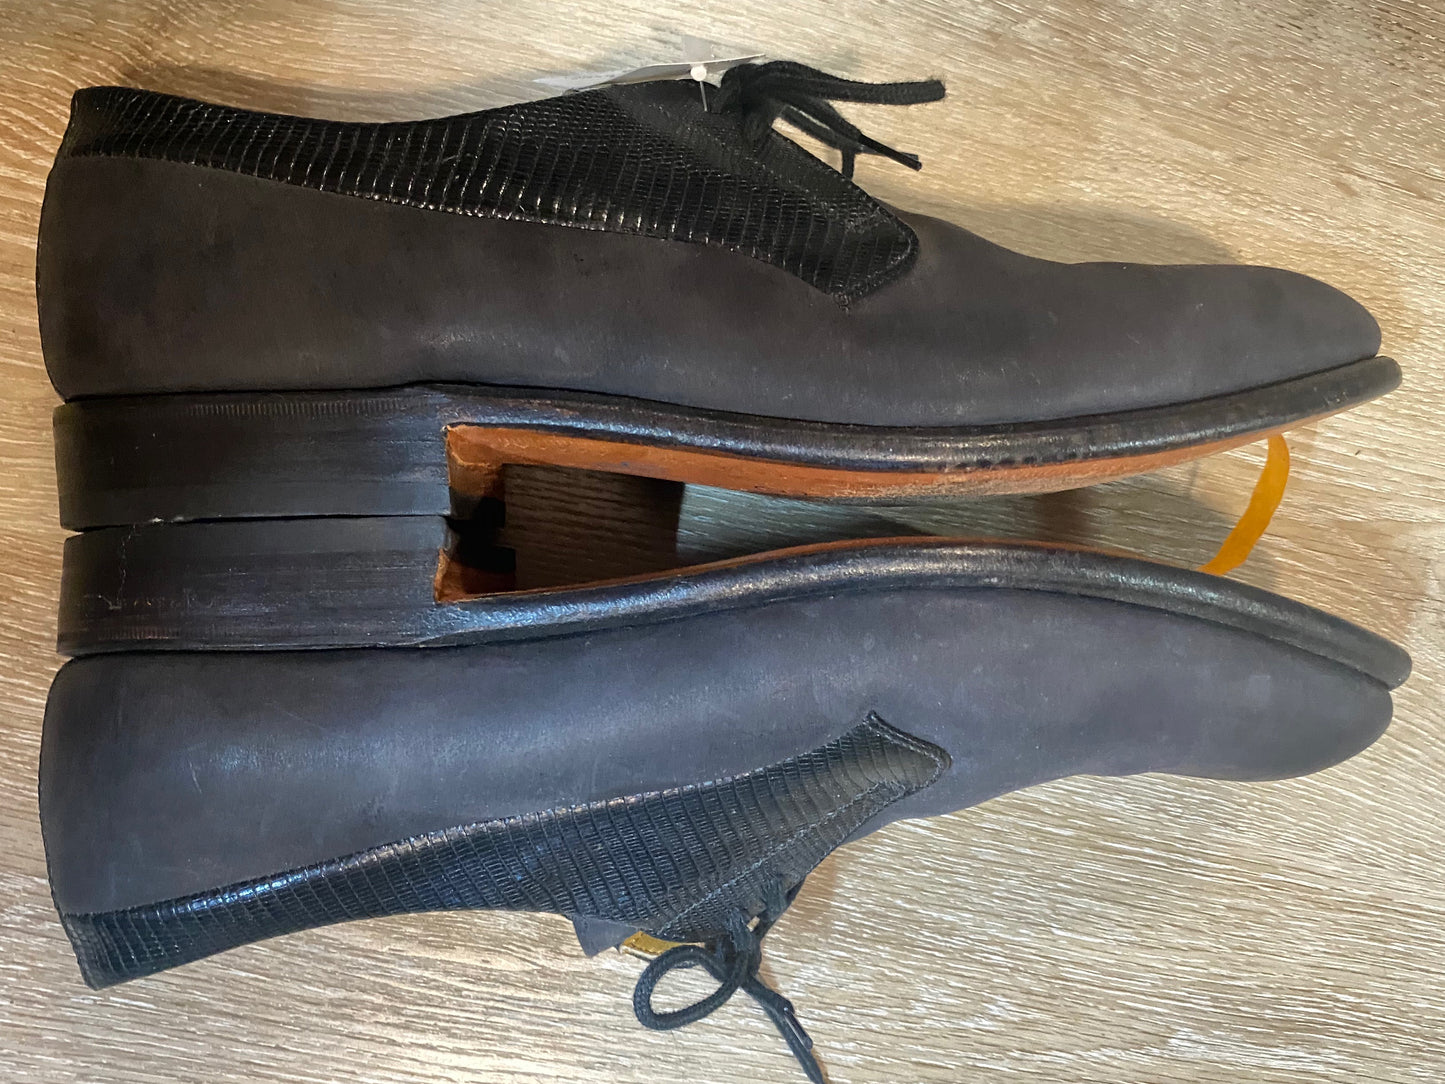 Kingspier Vintage - Black Lizard Collar Derbies by Dack’s Finest Quality Shoes for Men - Sizes: 8M 10W 41EURO, Made in Canada, Genuine Imported Lizard Collar with Matte Black Body, Extra Quality Leather Soles and Rubber Heels